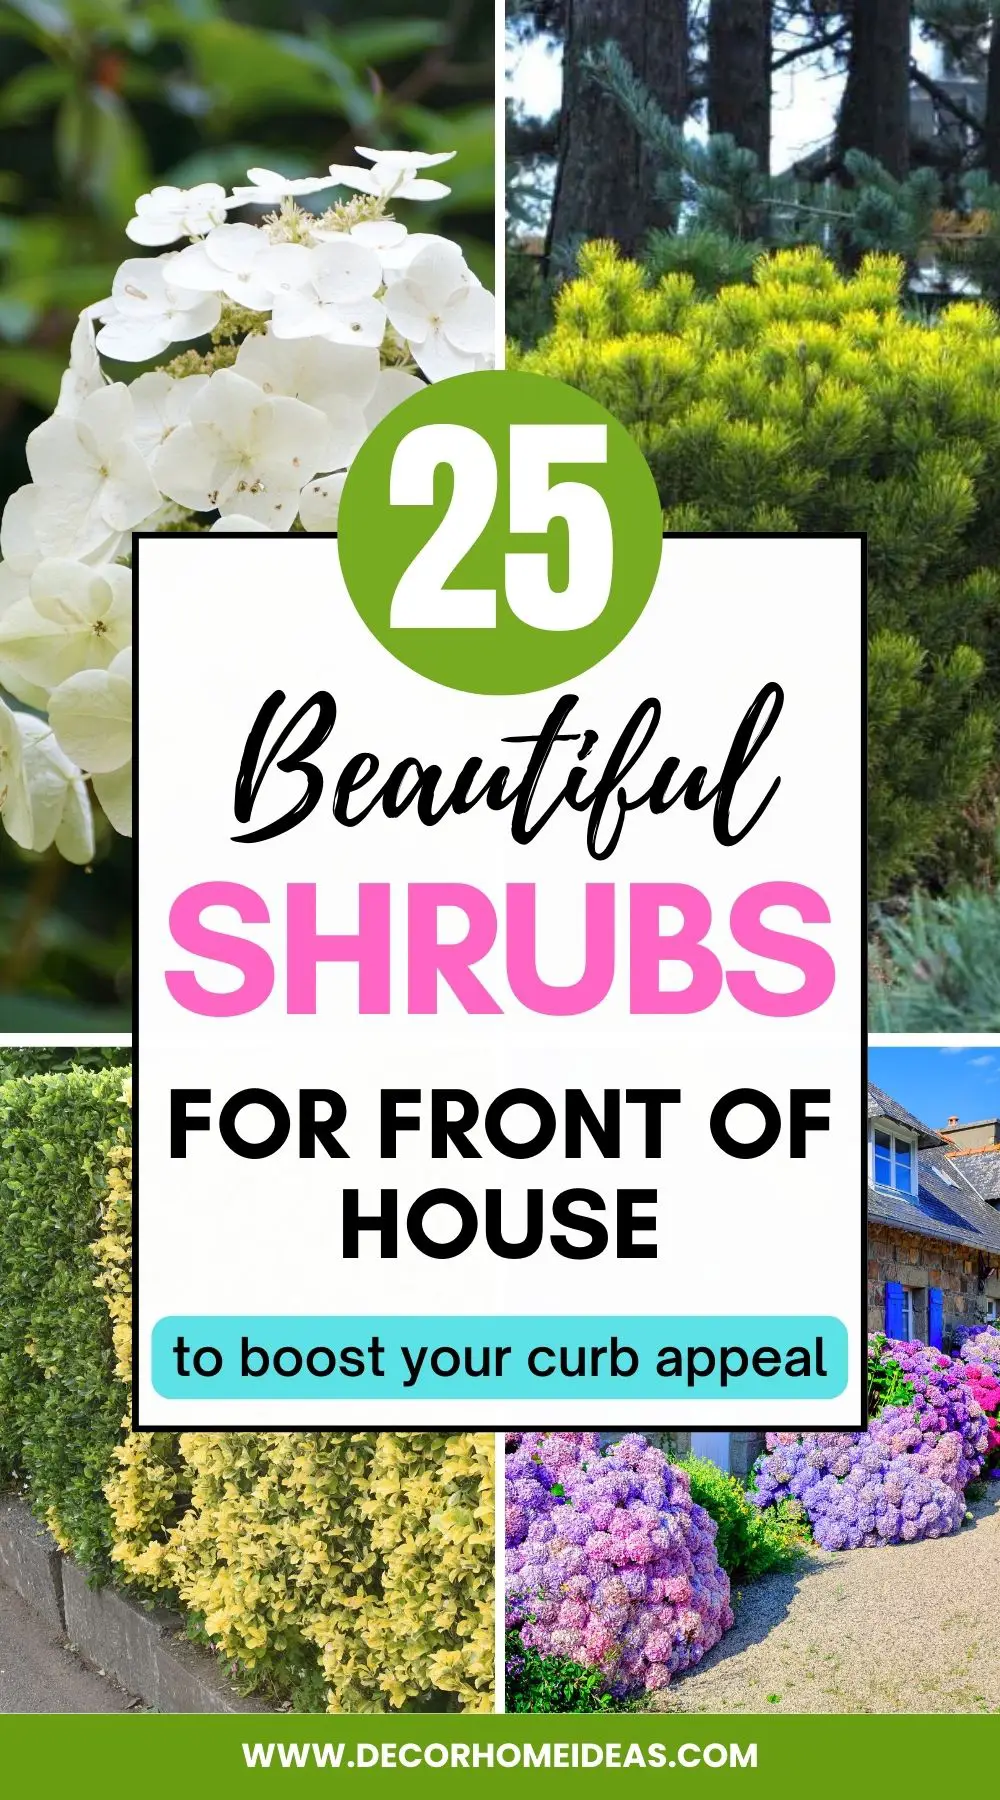 Discover the top shrubs to add beauty and value to your home's front yard. We've selected the most visually striking and easy-to-maintain plants, and shared practical tips for creating an attractive and welcoming landscape.